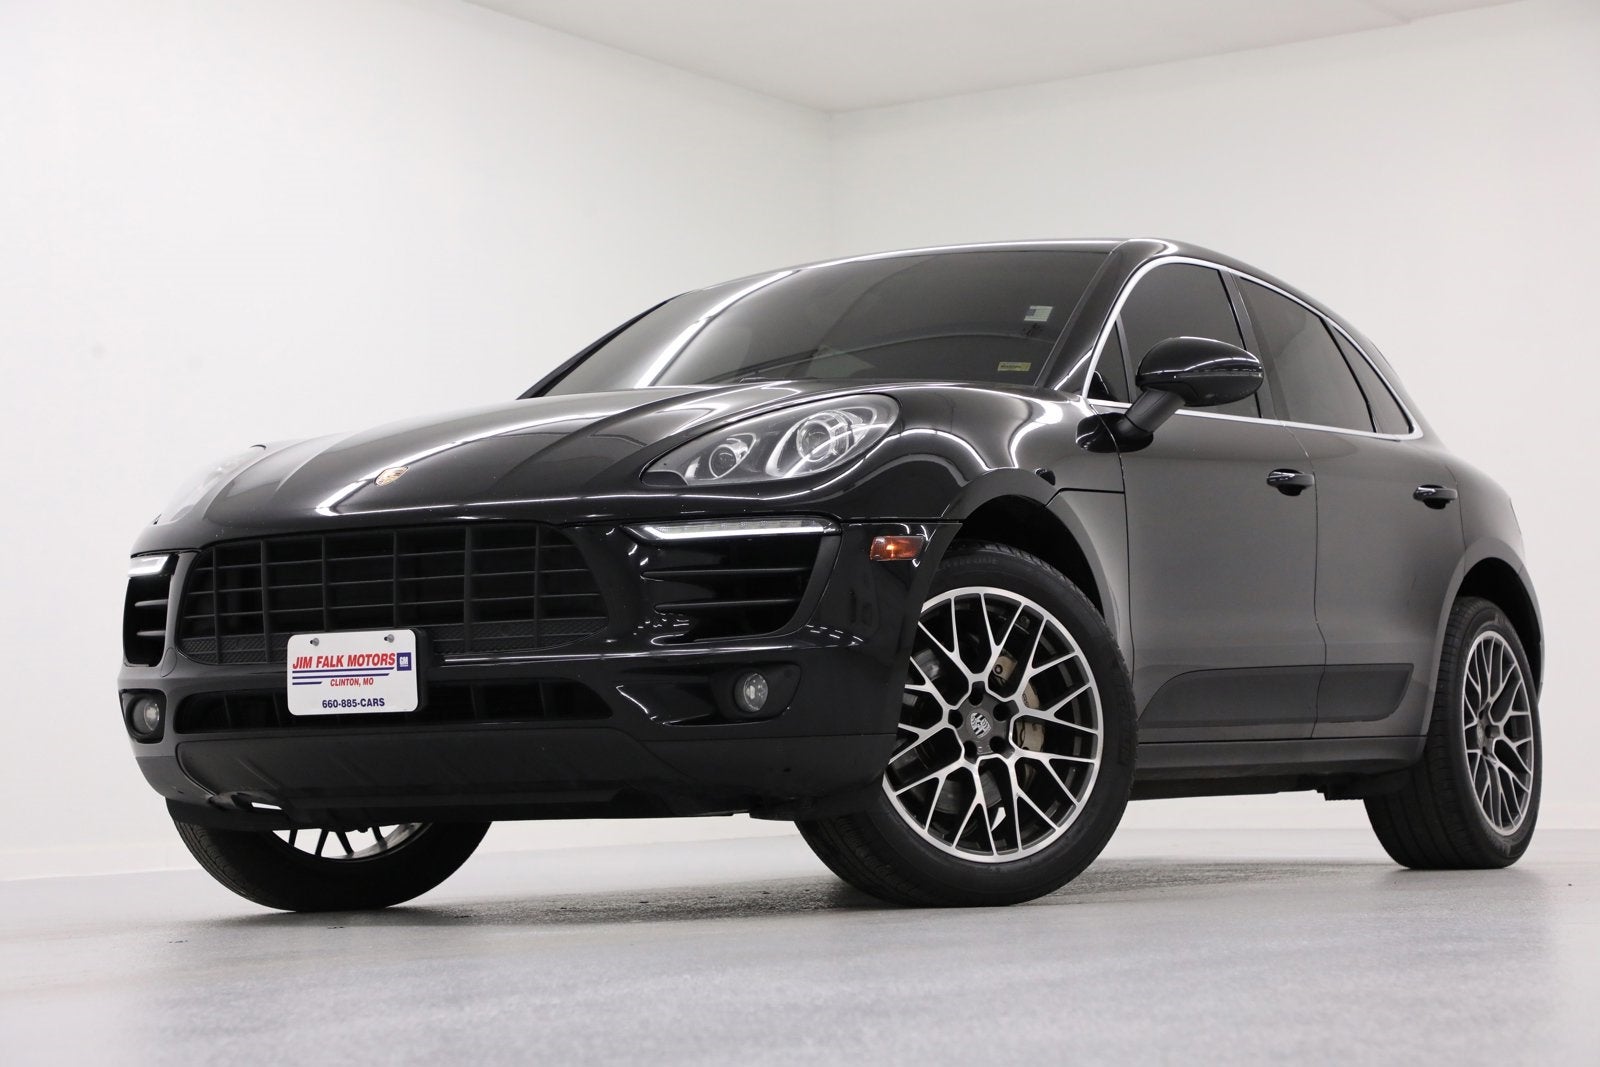 2015 Porsche Macan S AWD Heated Black Leather MBRP Exhaust Tinted 20 Inch Spyder Wheels Bose Navigation